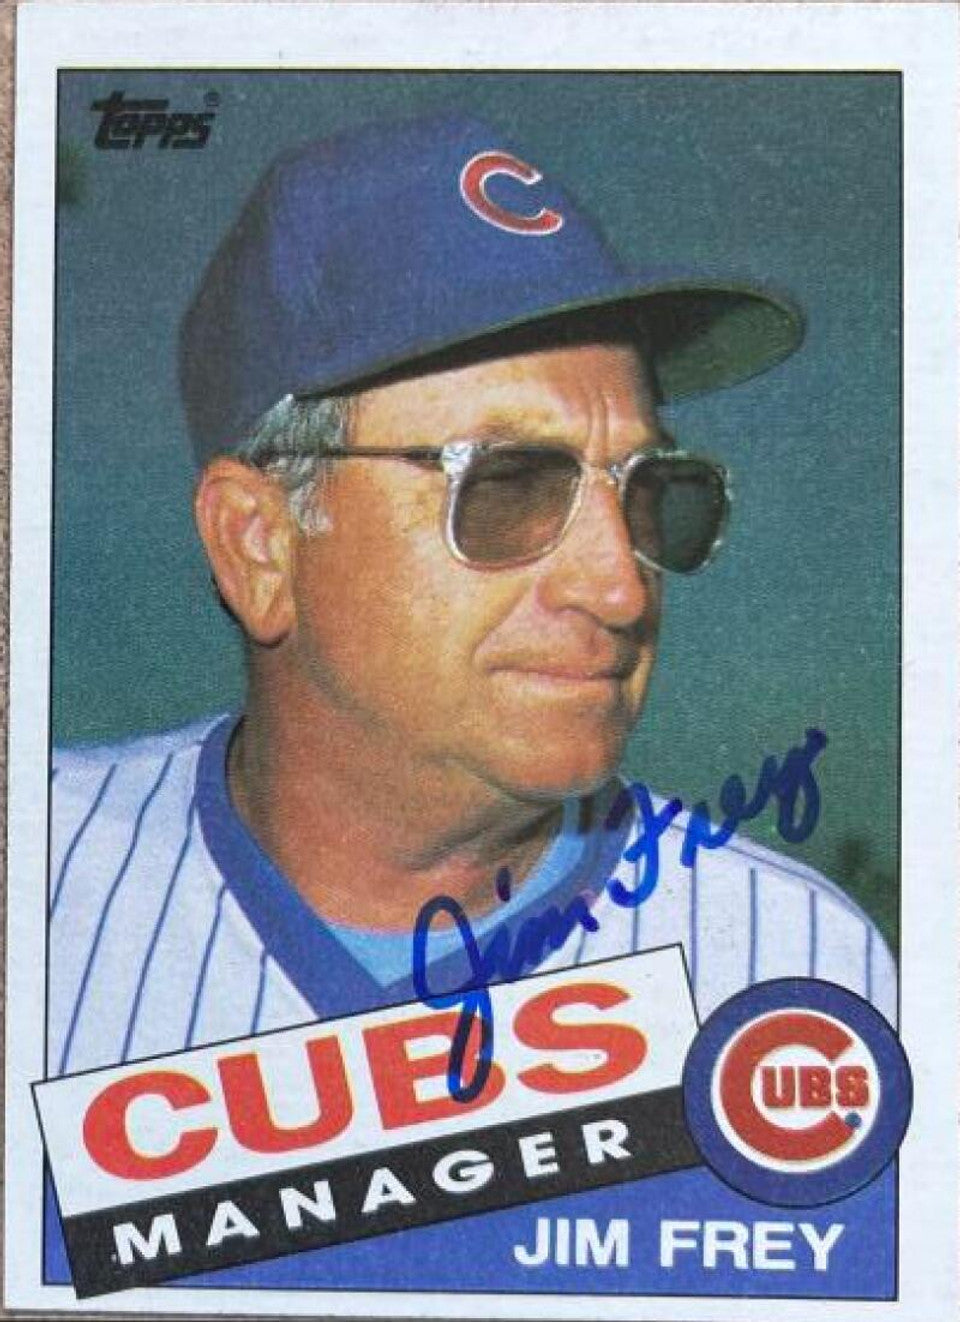 Jim Frey Signed 1985 Topps Baseball Card - Chicago Cubs